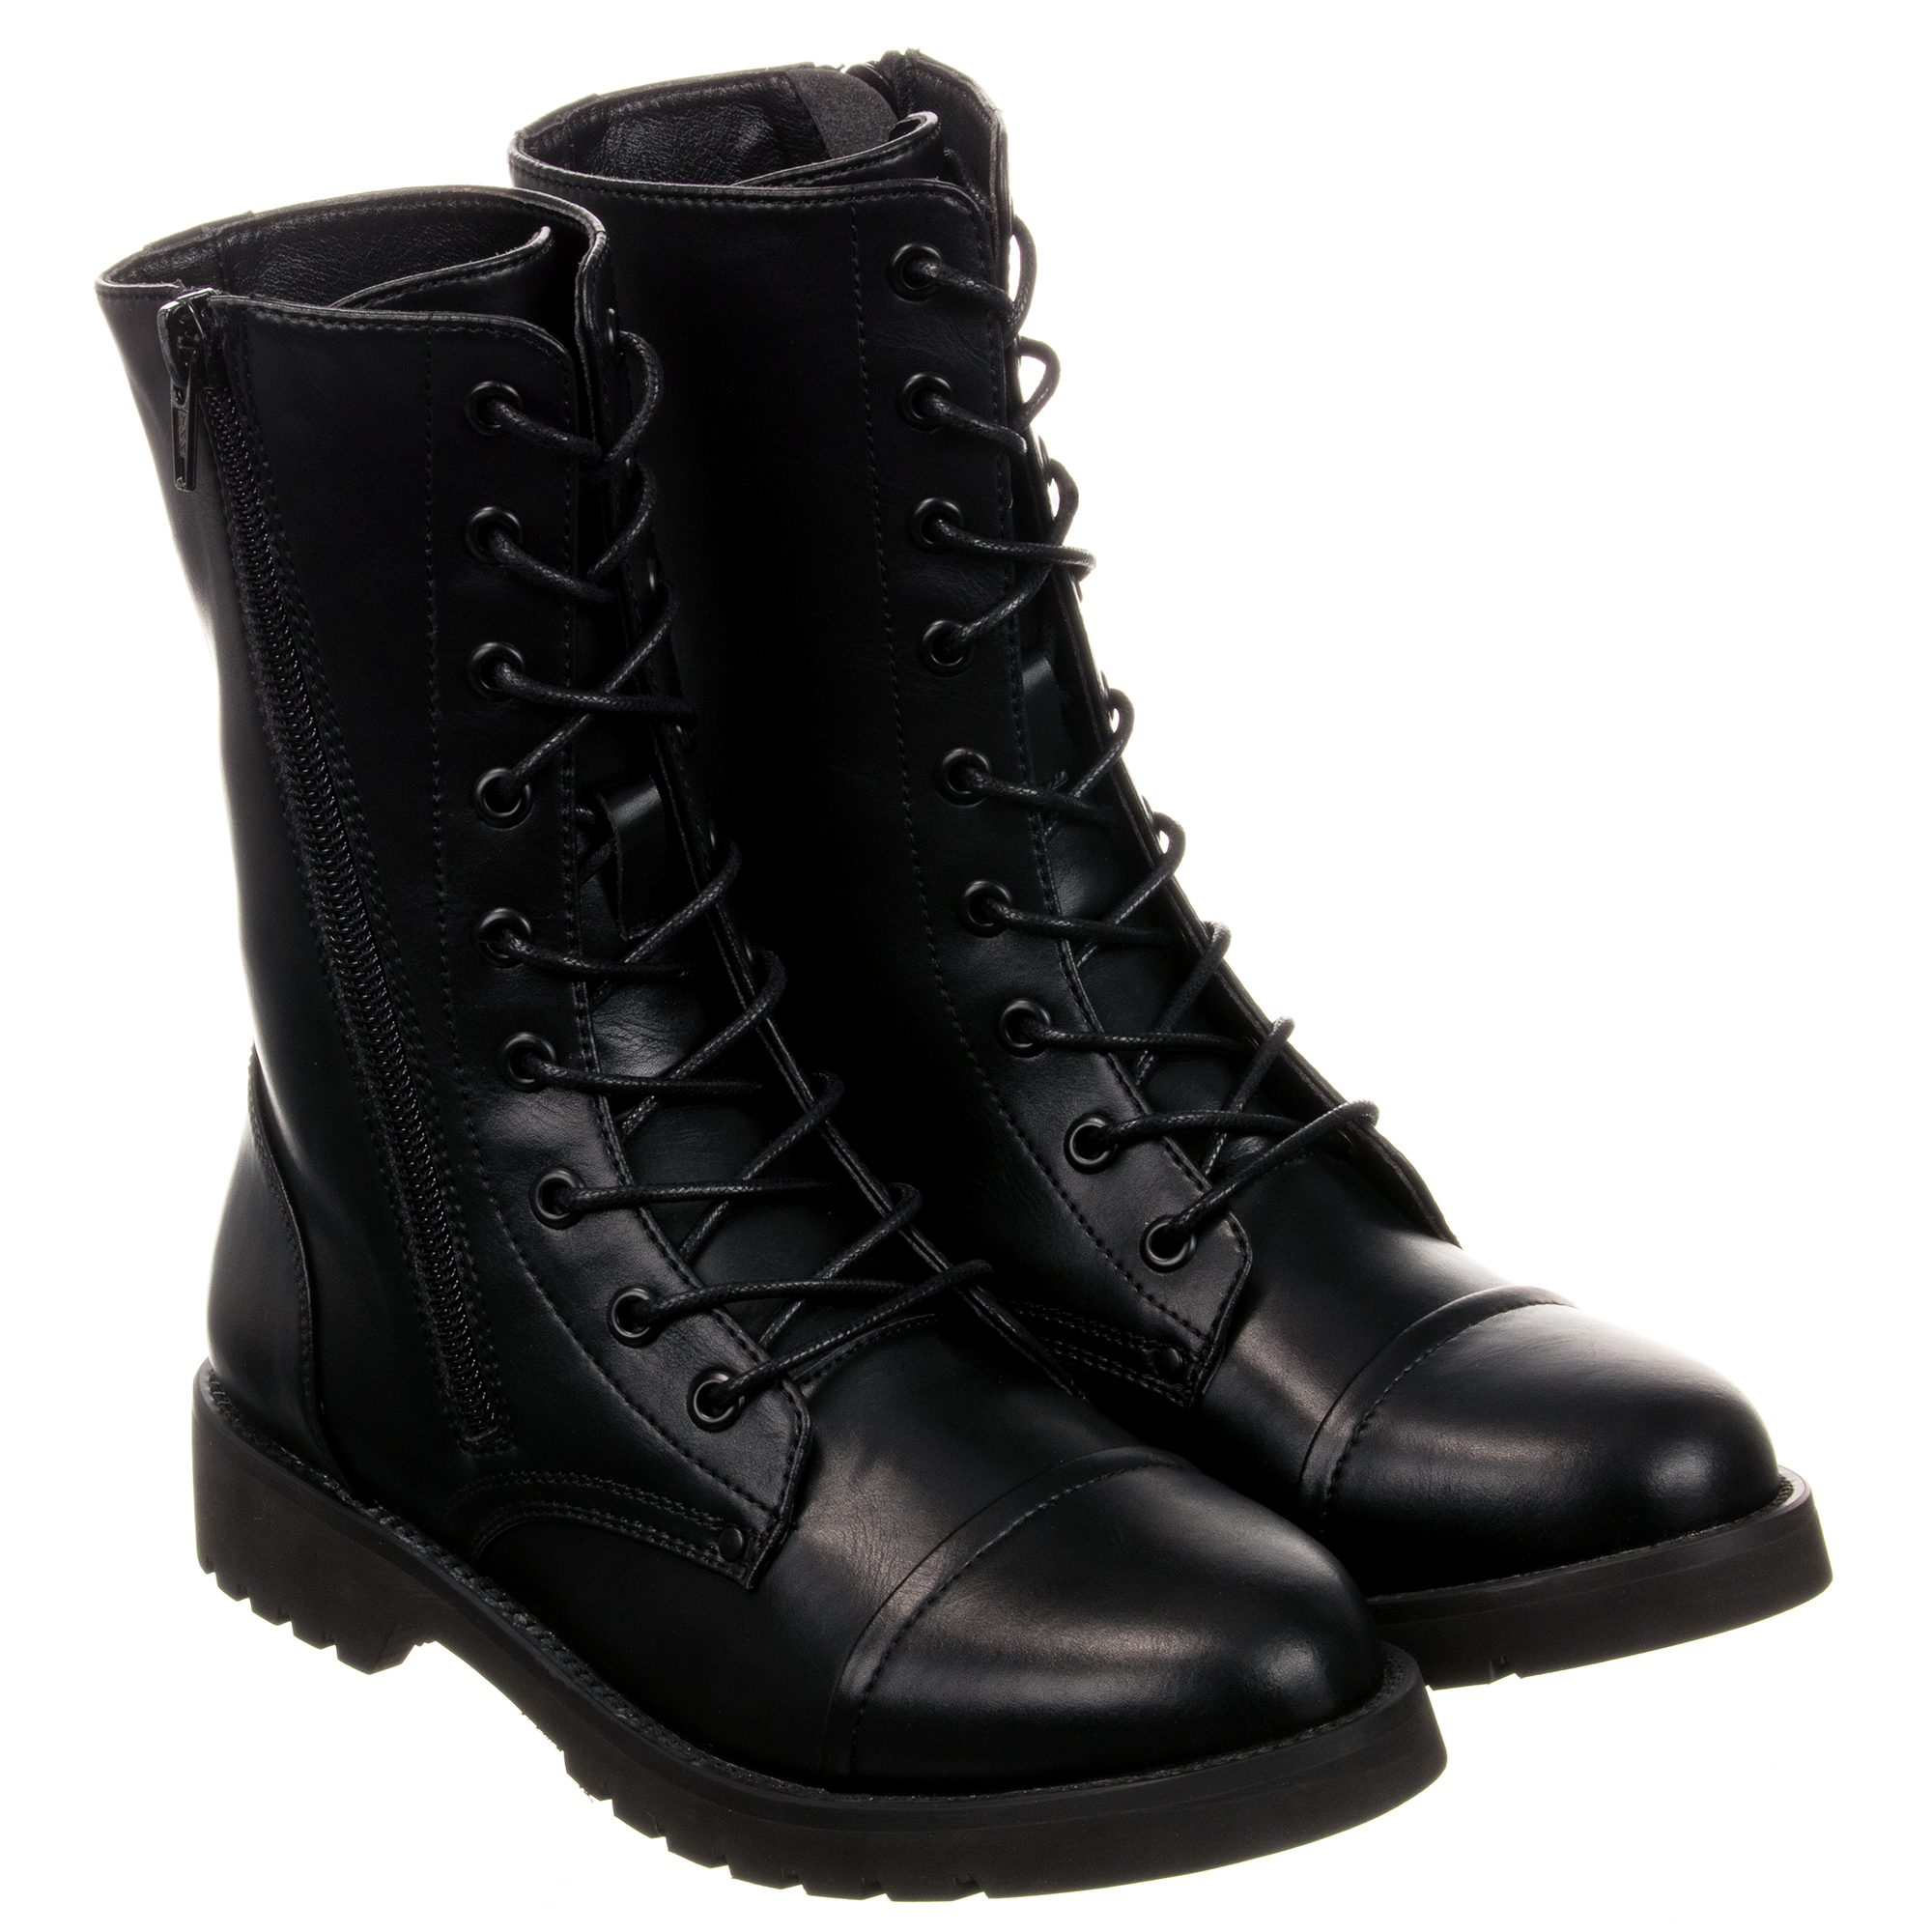 childrens black lace up boots